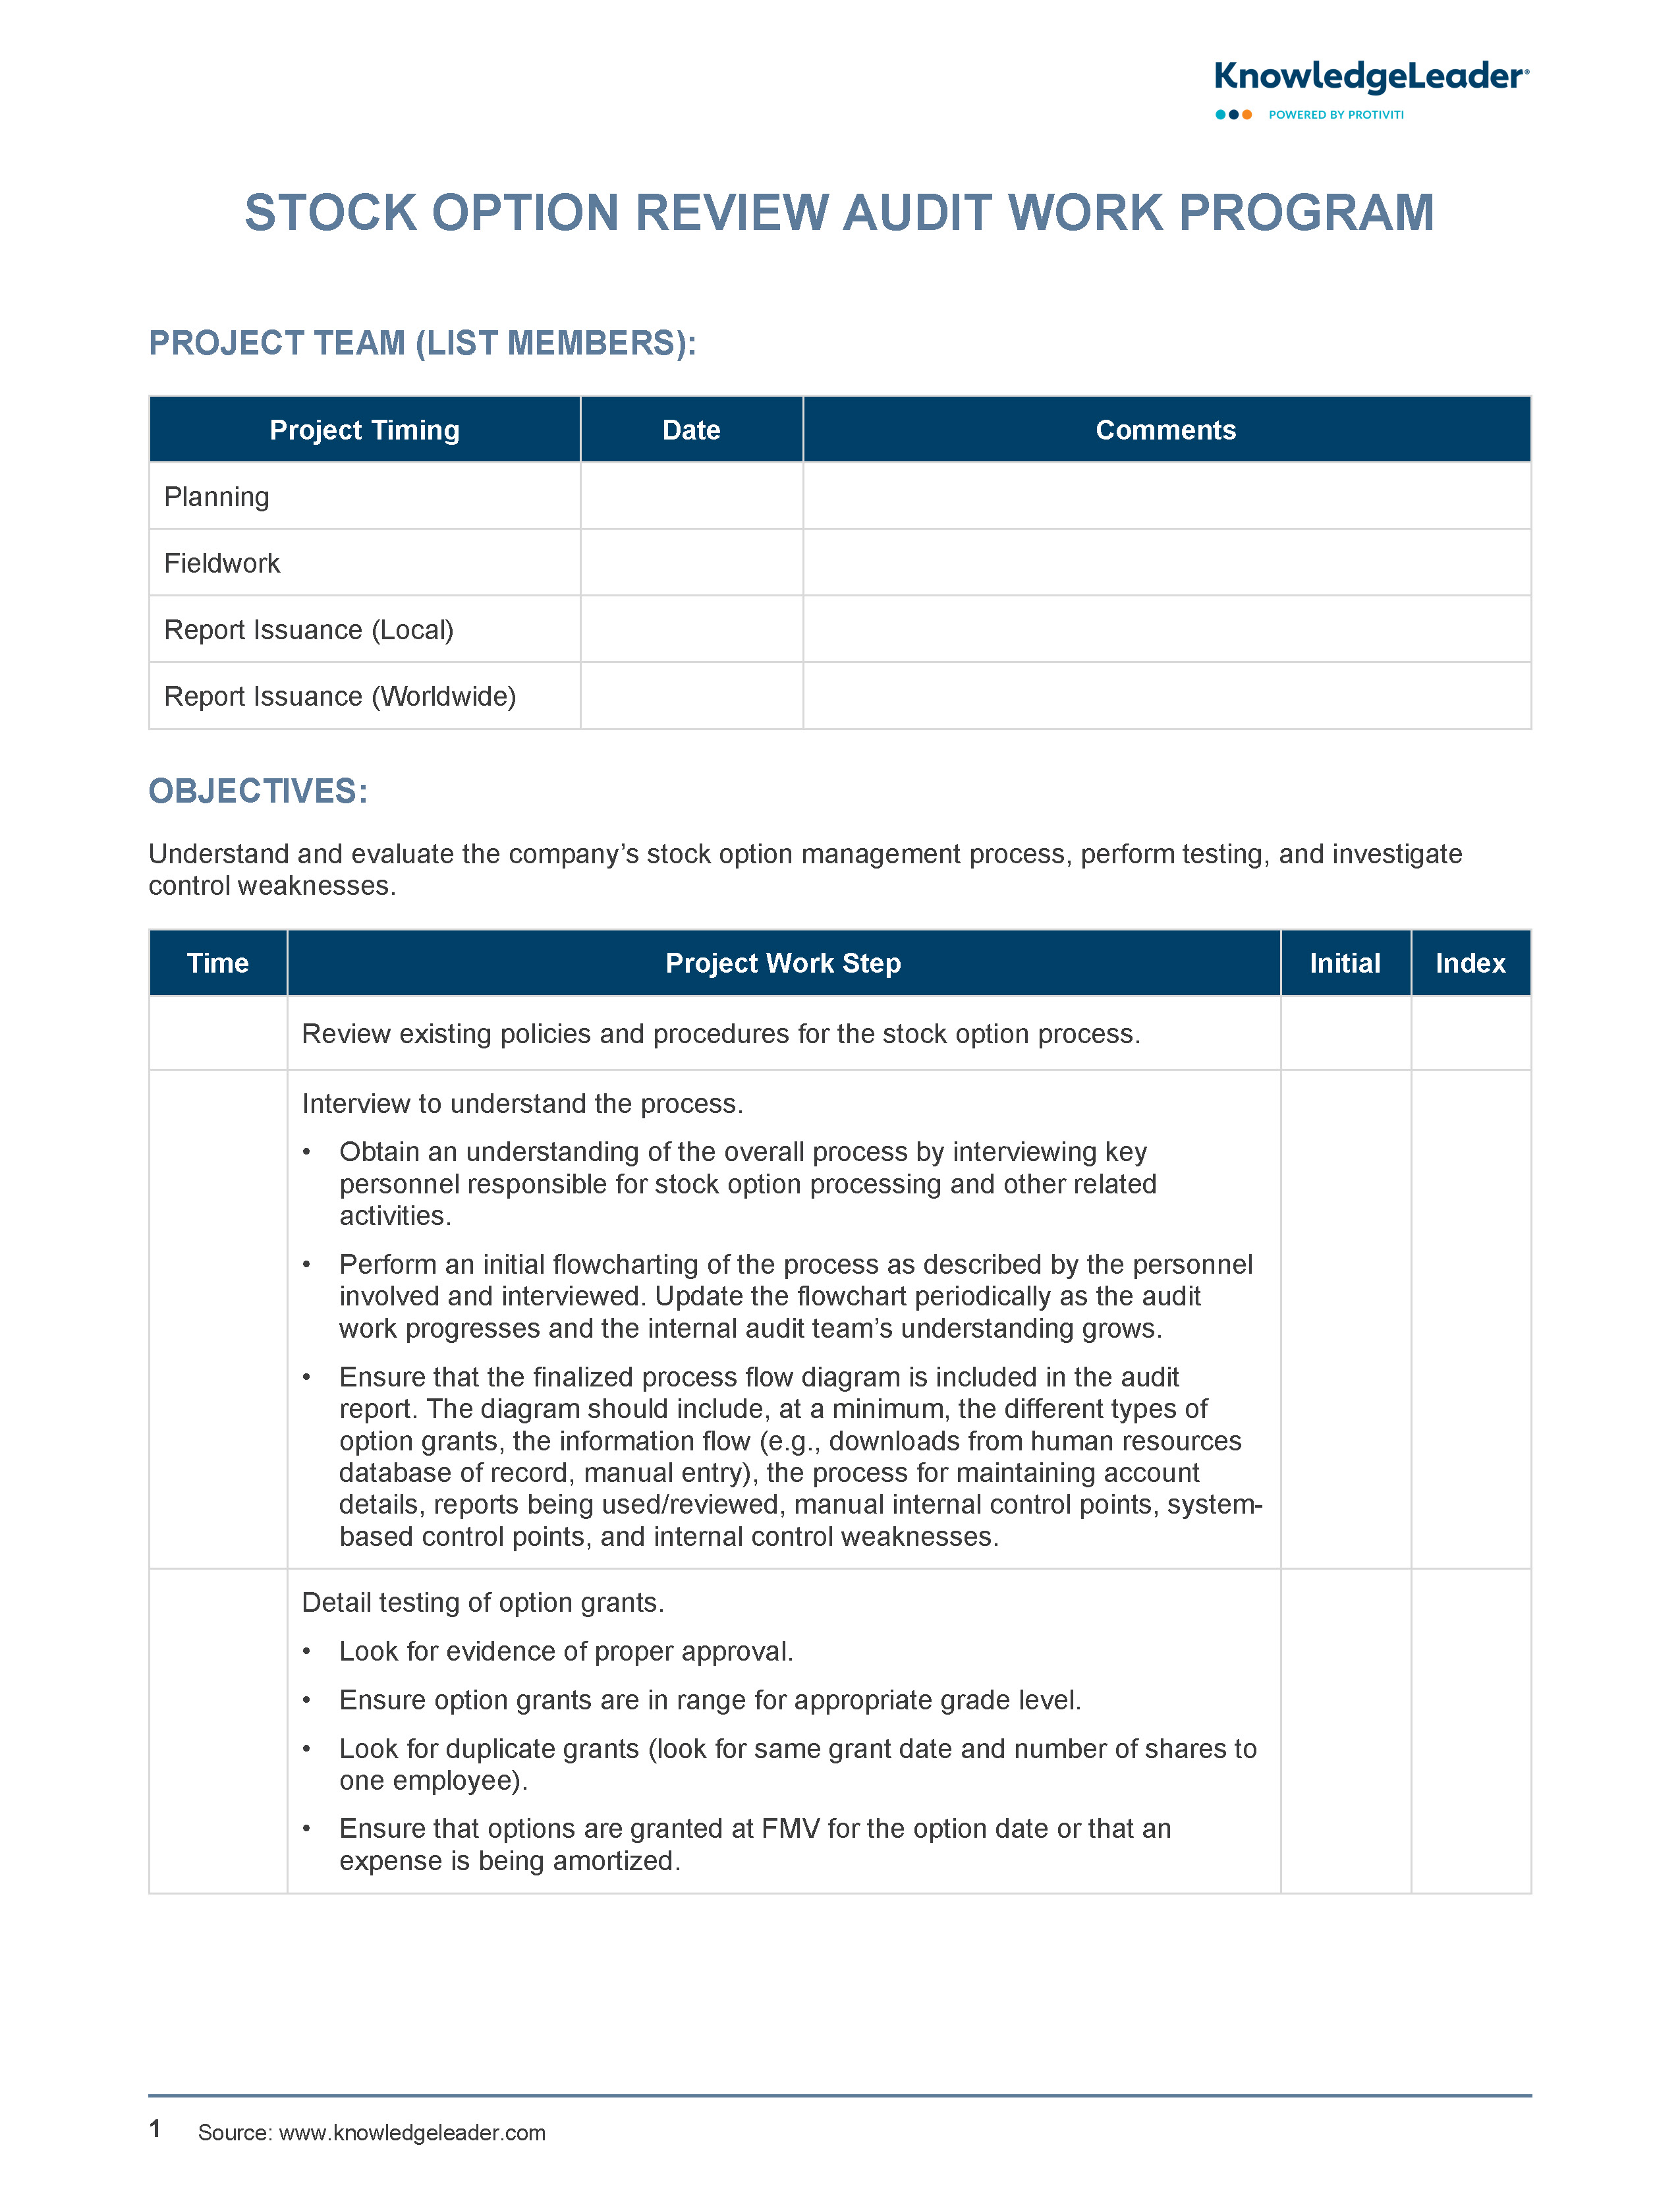 Screenshot of the first page of Stock Option Review Audit Work Program